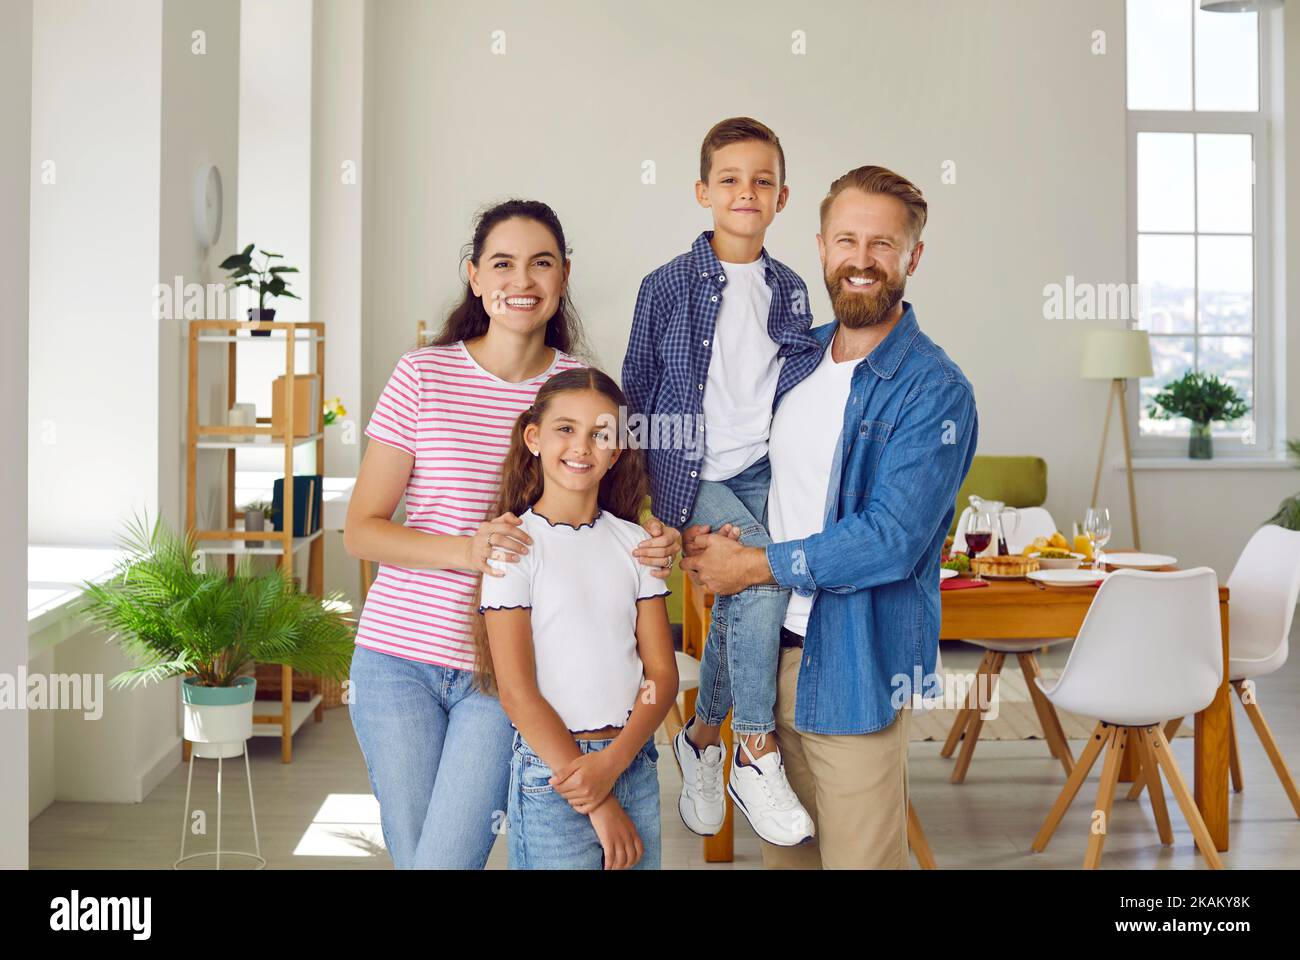 Portrait of happy family mom, dad, son and daughter in dinning room looking at camera. Stock Photo